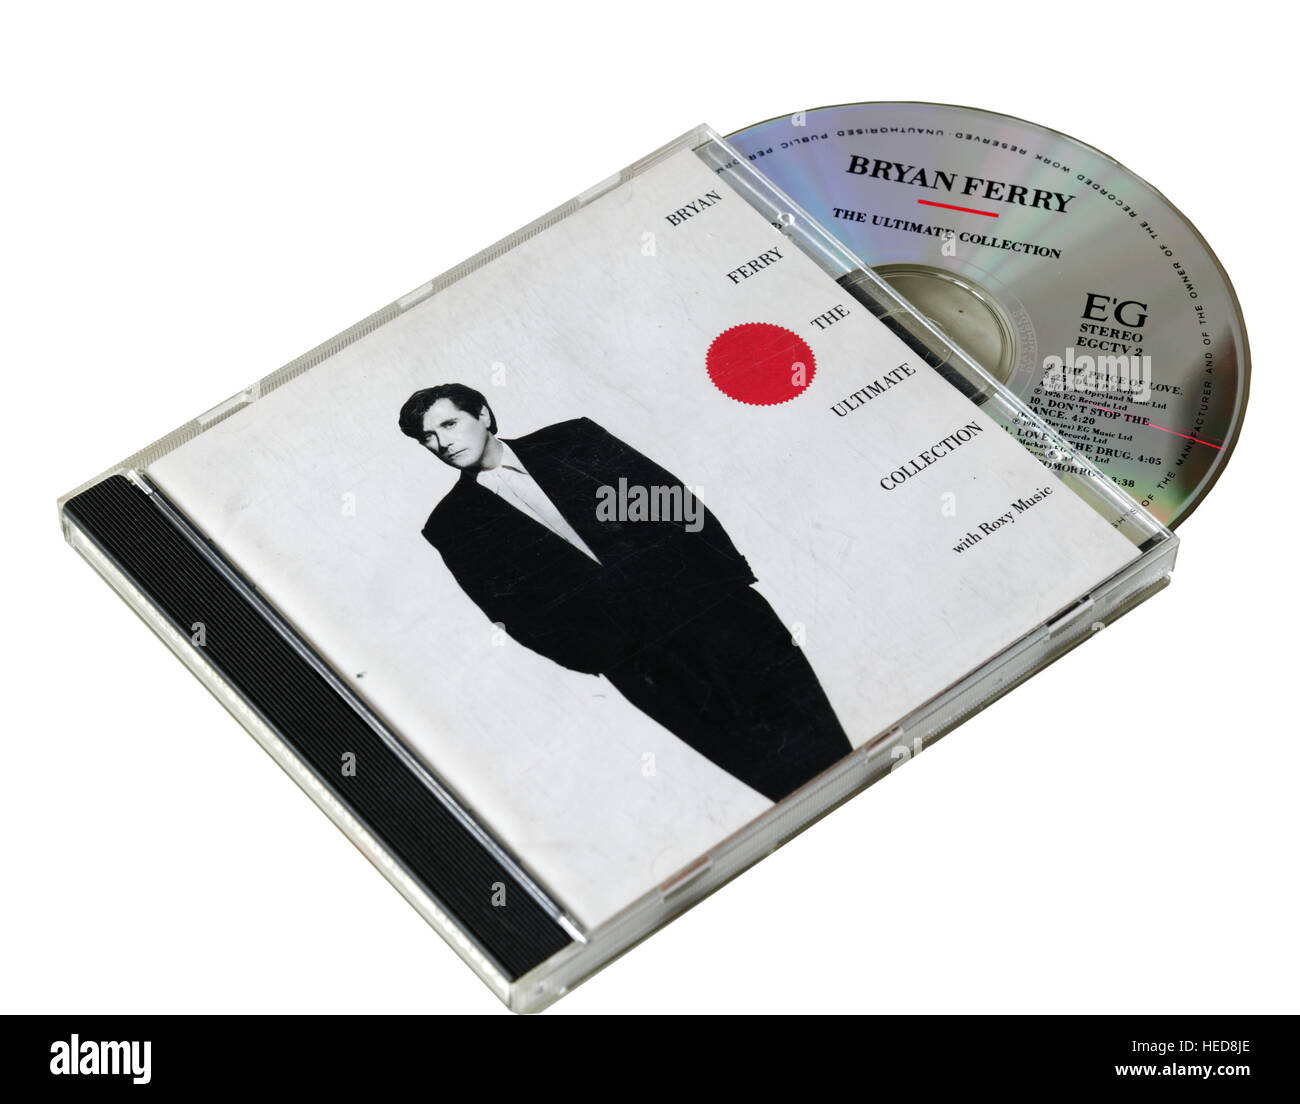 Bryan Ferry The Ultimate Collection CD Stock Photo